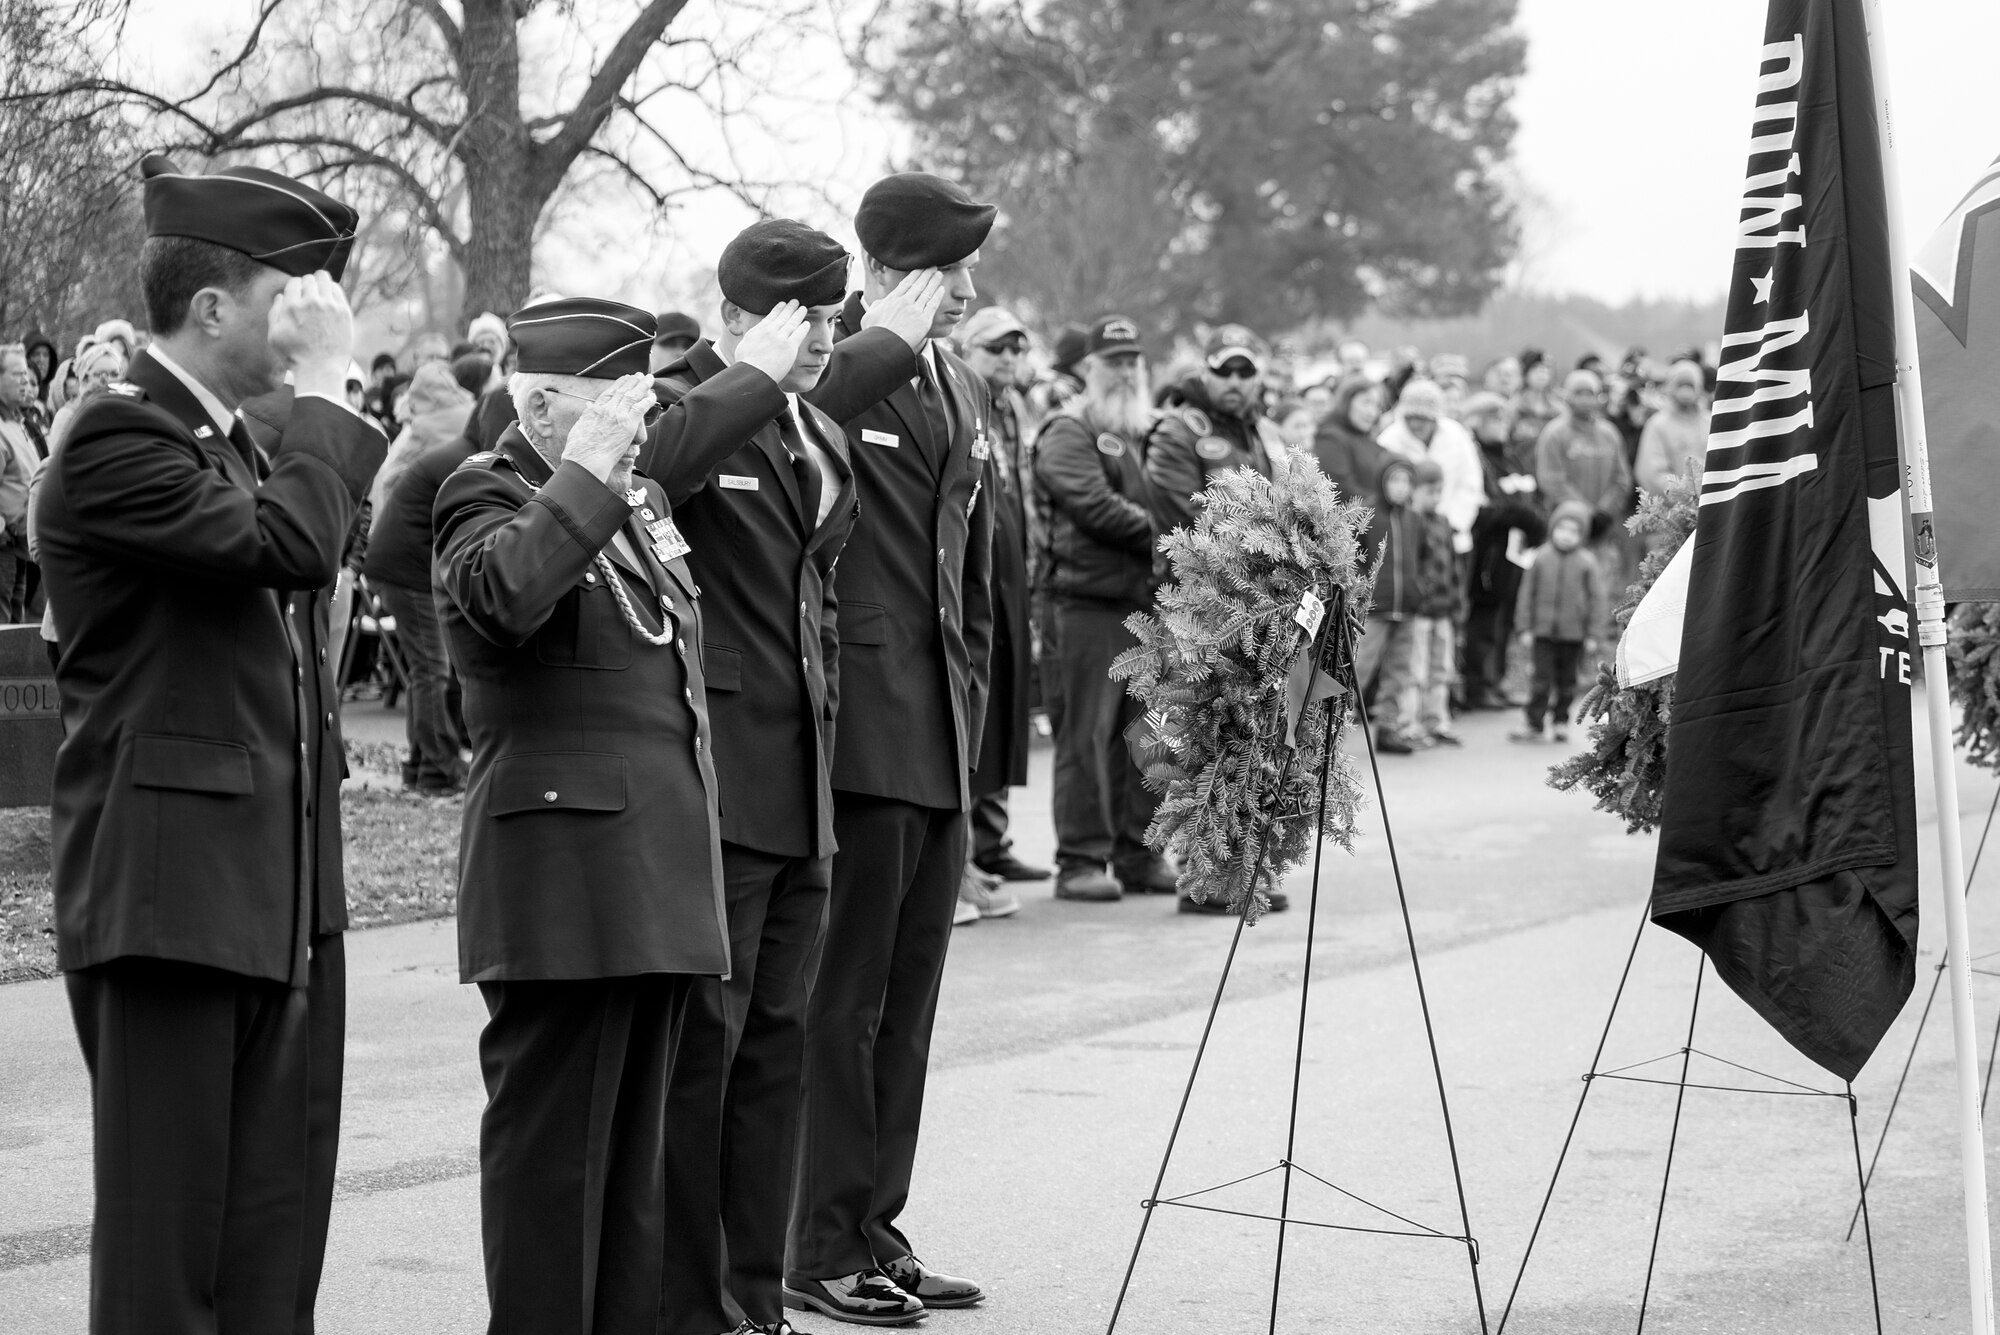 Airmen salute the Prisoner of War and Missing in Action flag during the Wreaths Across America ceremony, Dec. 17, 2016, at Evergreen Memorial Cemetery in Princeton, North Carolina. More than 50 Airmen from Seymour Johnson Air Force Base, North Carolina volunteered at the ceremony. (U.S. Air Force photo by Airman Shawna L. Keyes)